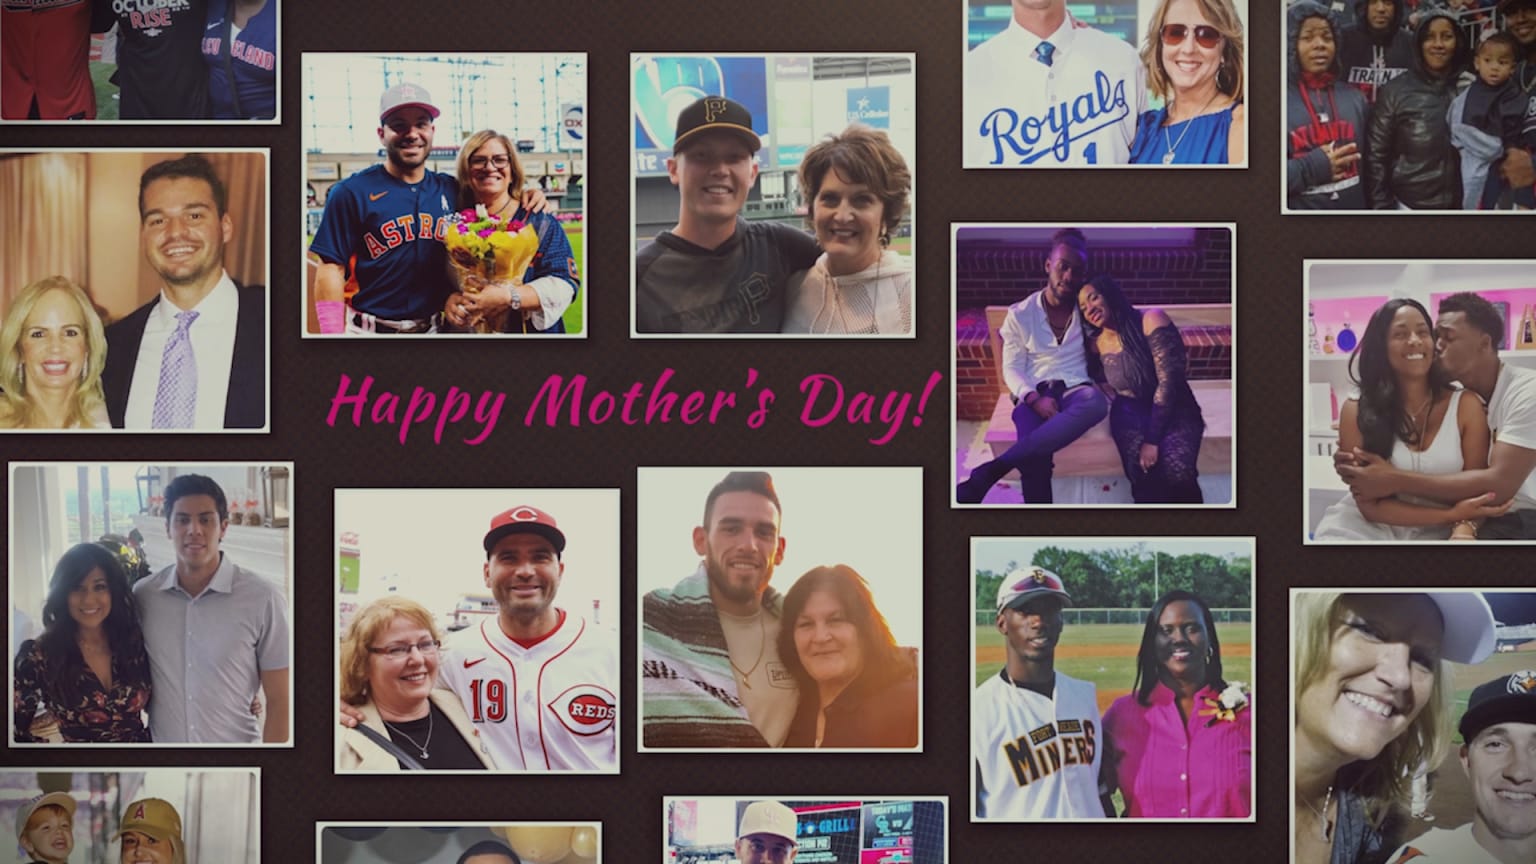 A montage shows various photos of players with their mothers